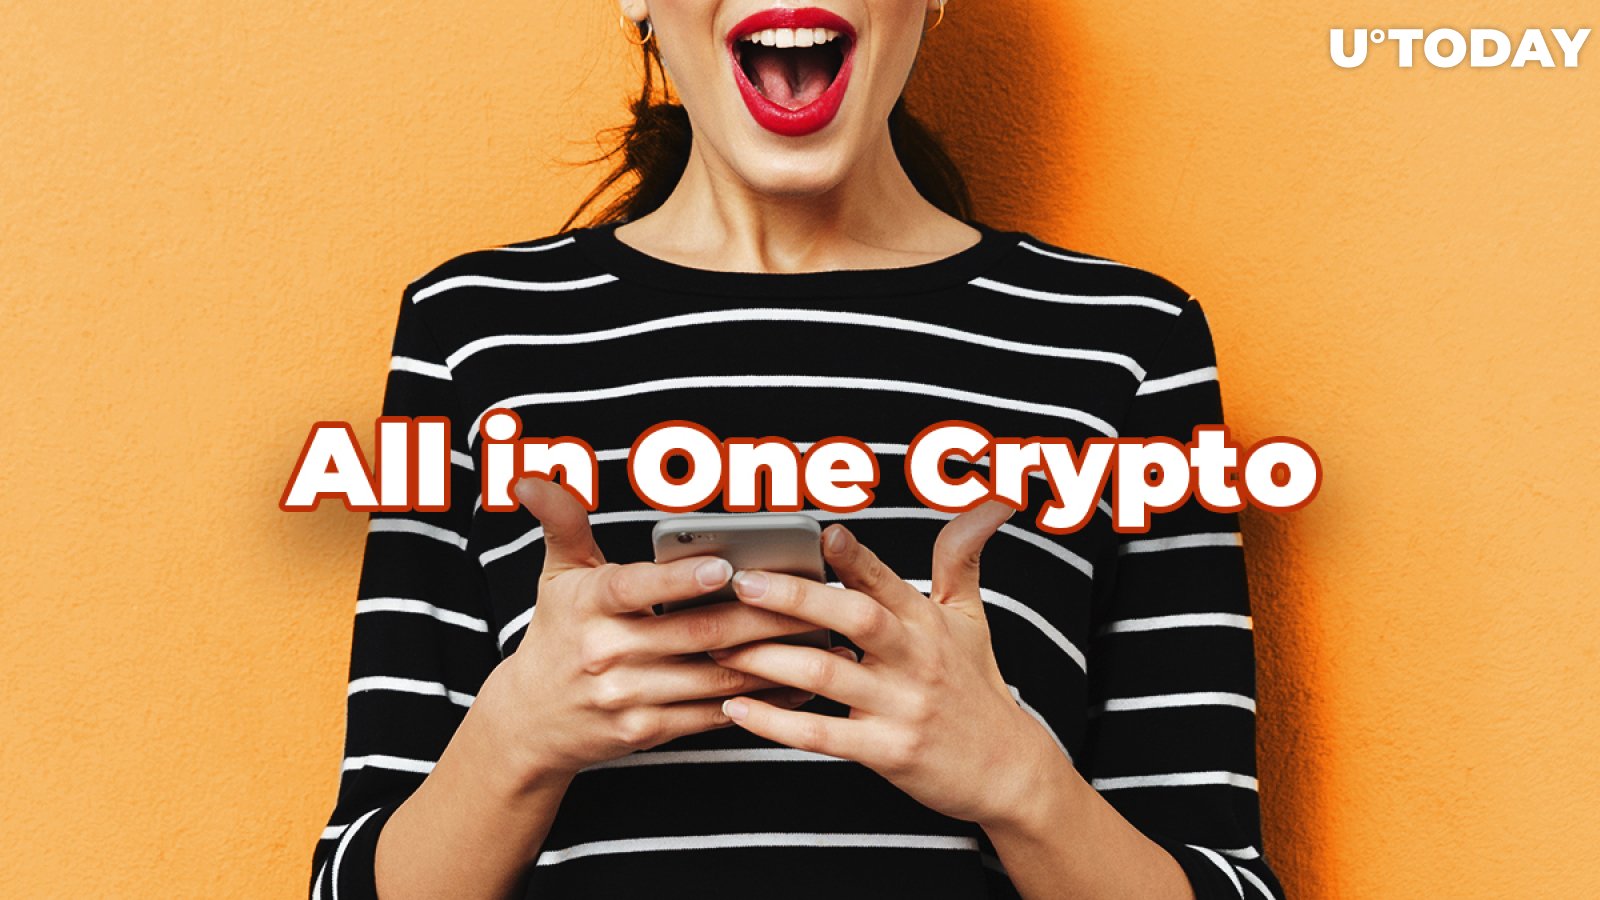 All in One Crypto App Now Allows Checking Out U.Today News 